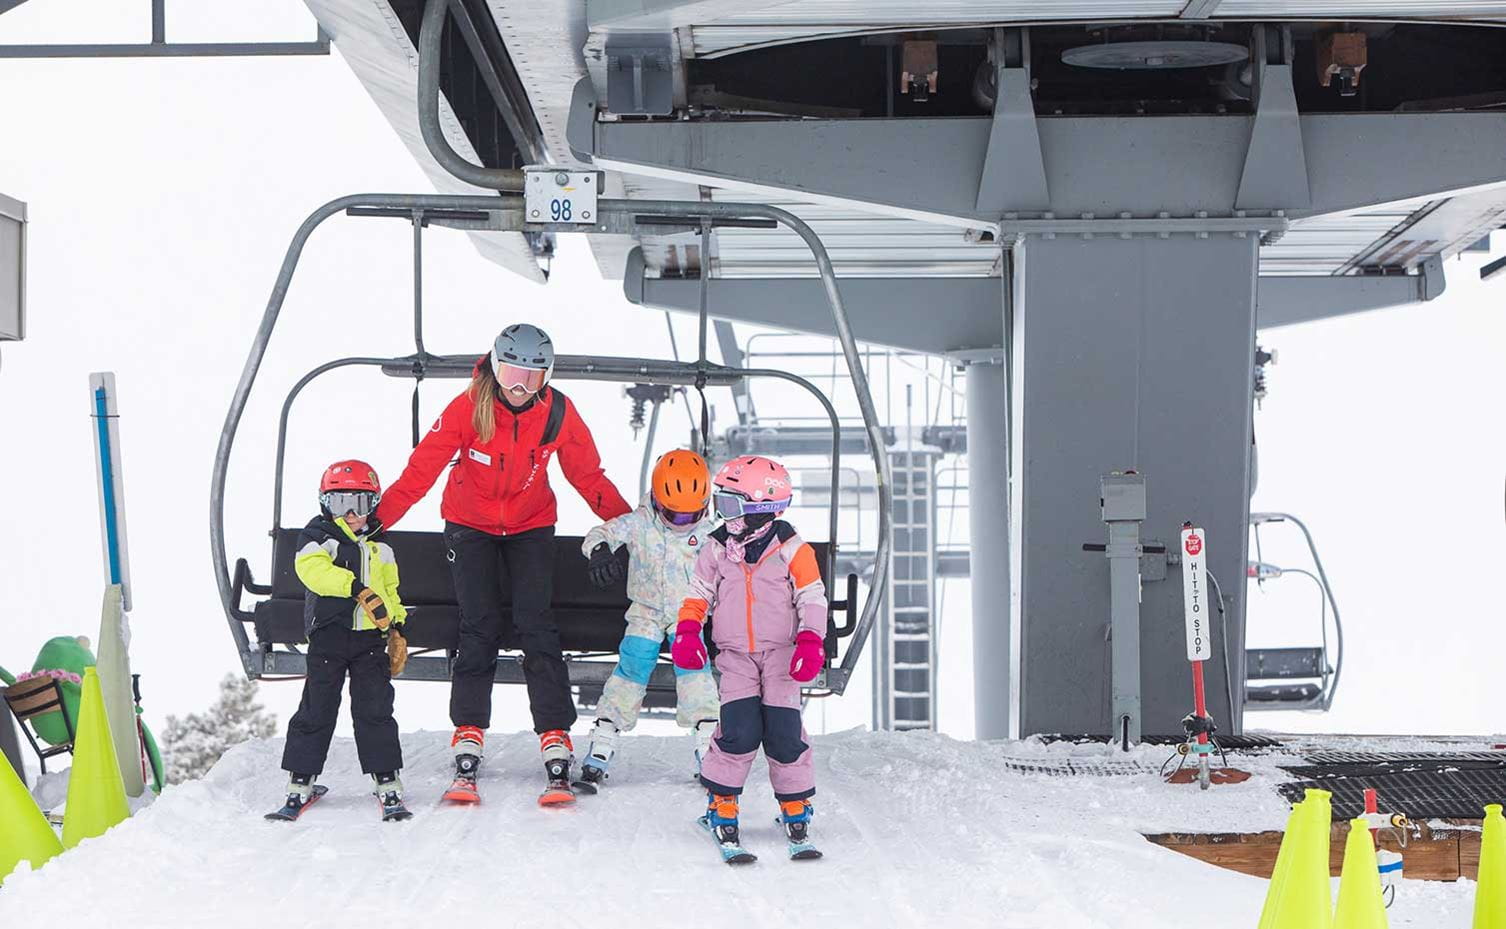 A ski school instructor at Buttermilk helps two kids get off the lift.